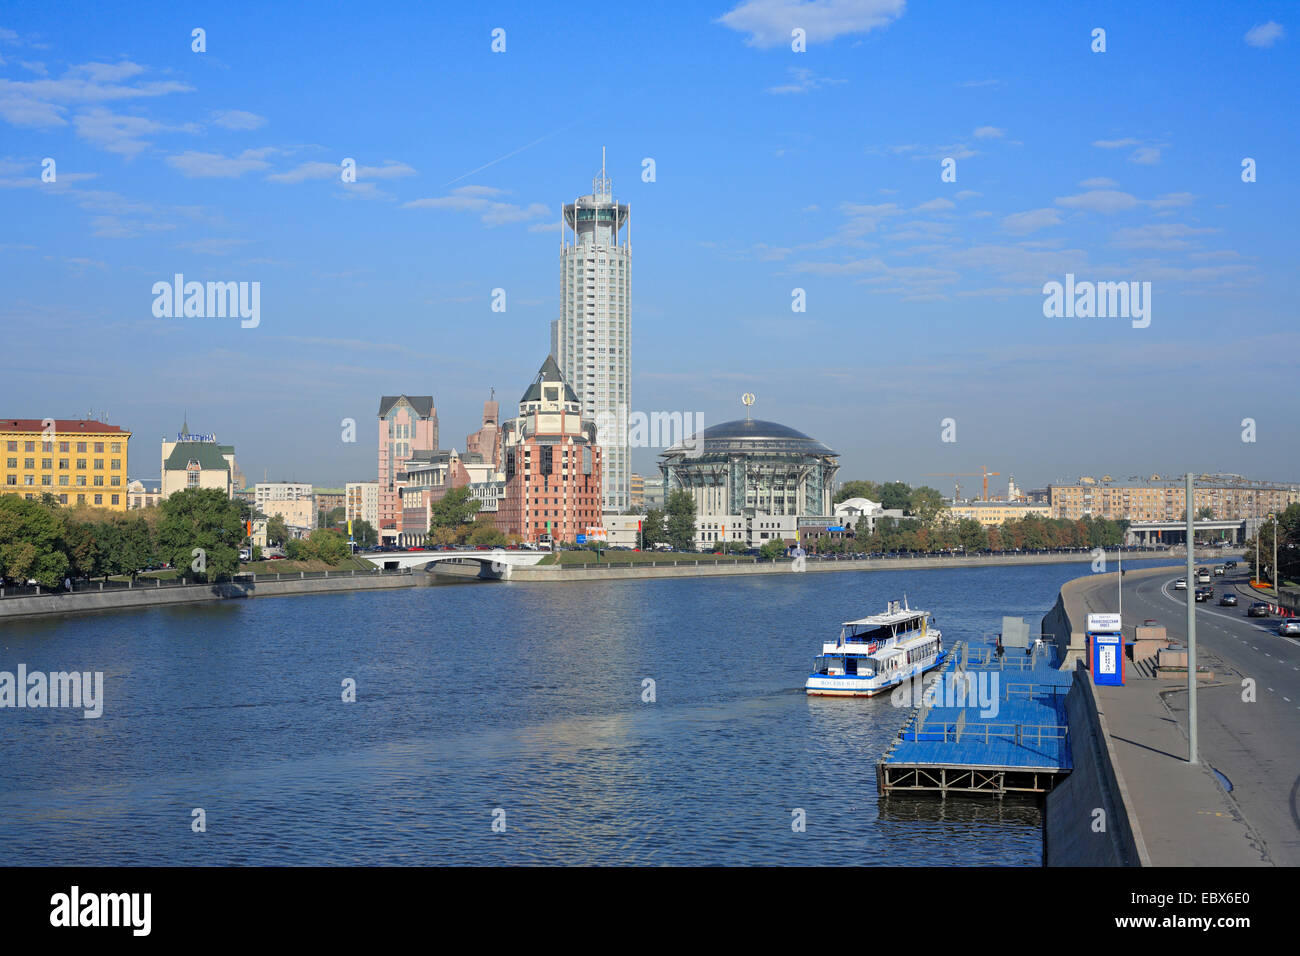 Modern high building with House of Music, Moskva river with tourist boat, Russia, Moskau Stock Photo